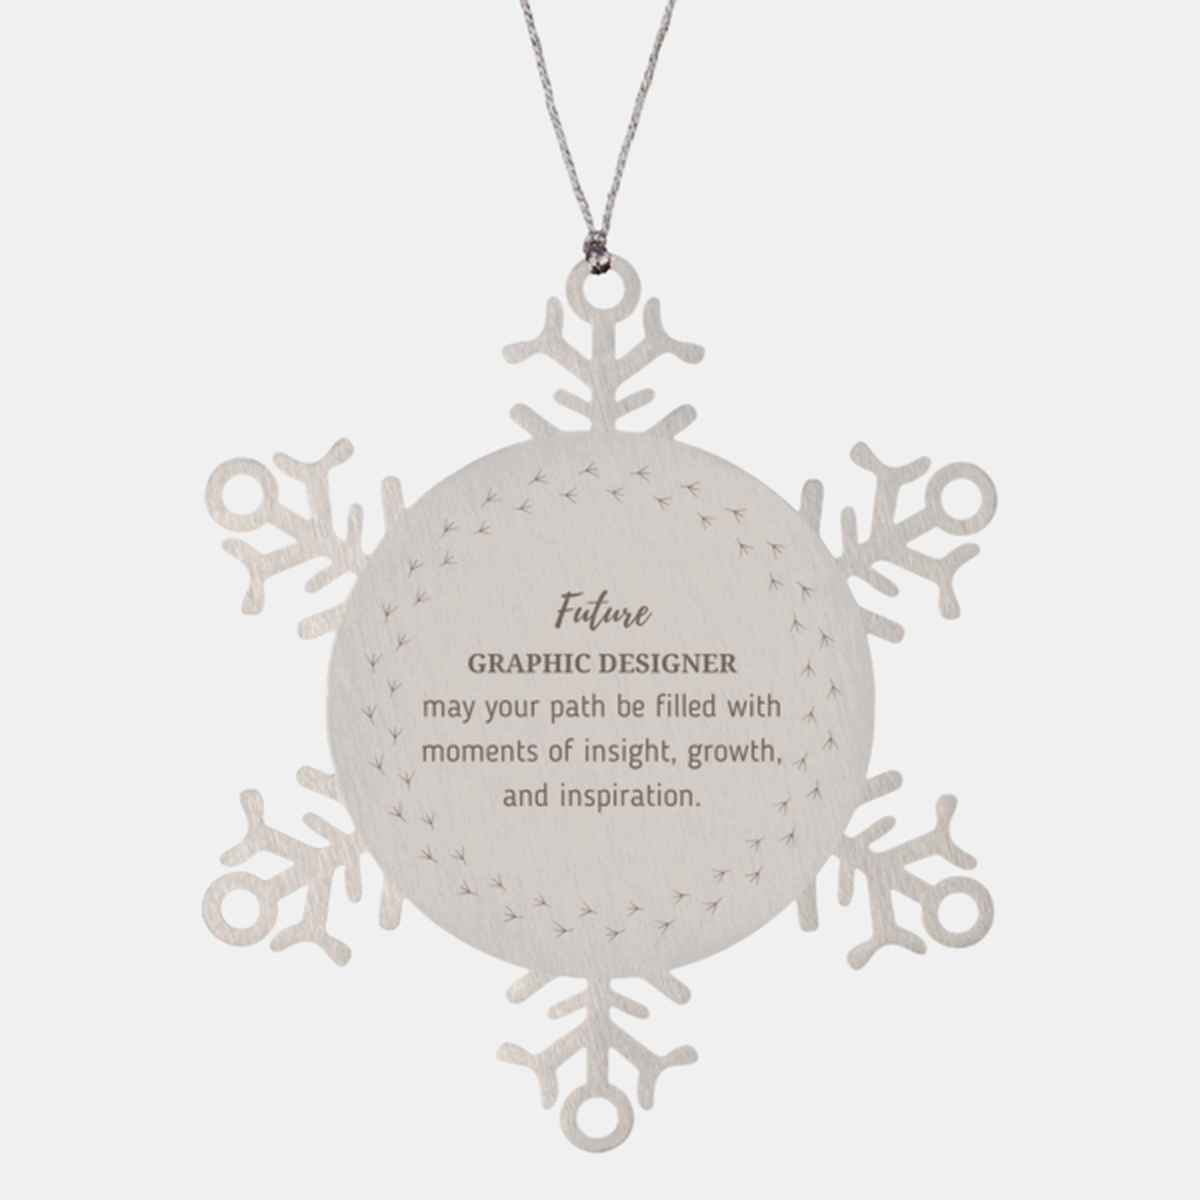 Future Graphic Designer Gifts, May your path be filled with moments of insight, Graduation Gifts for New Graphic Designer, Christmas Unique Snowflake Ornament For Men, Women, Friends